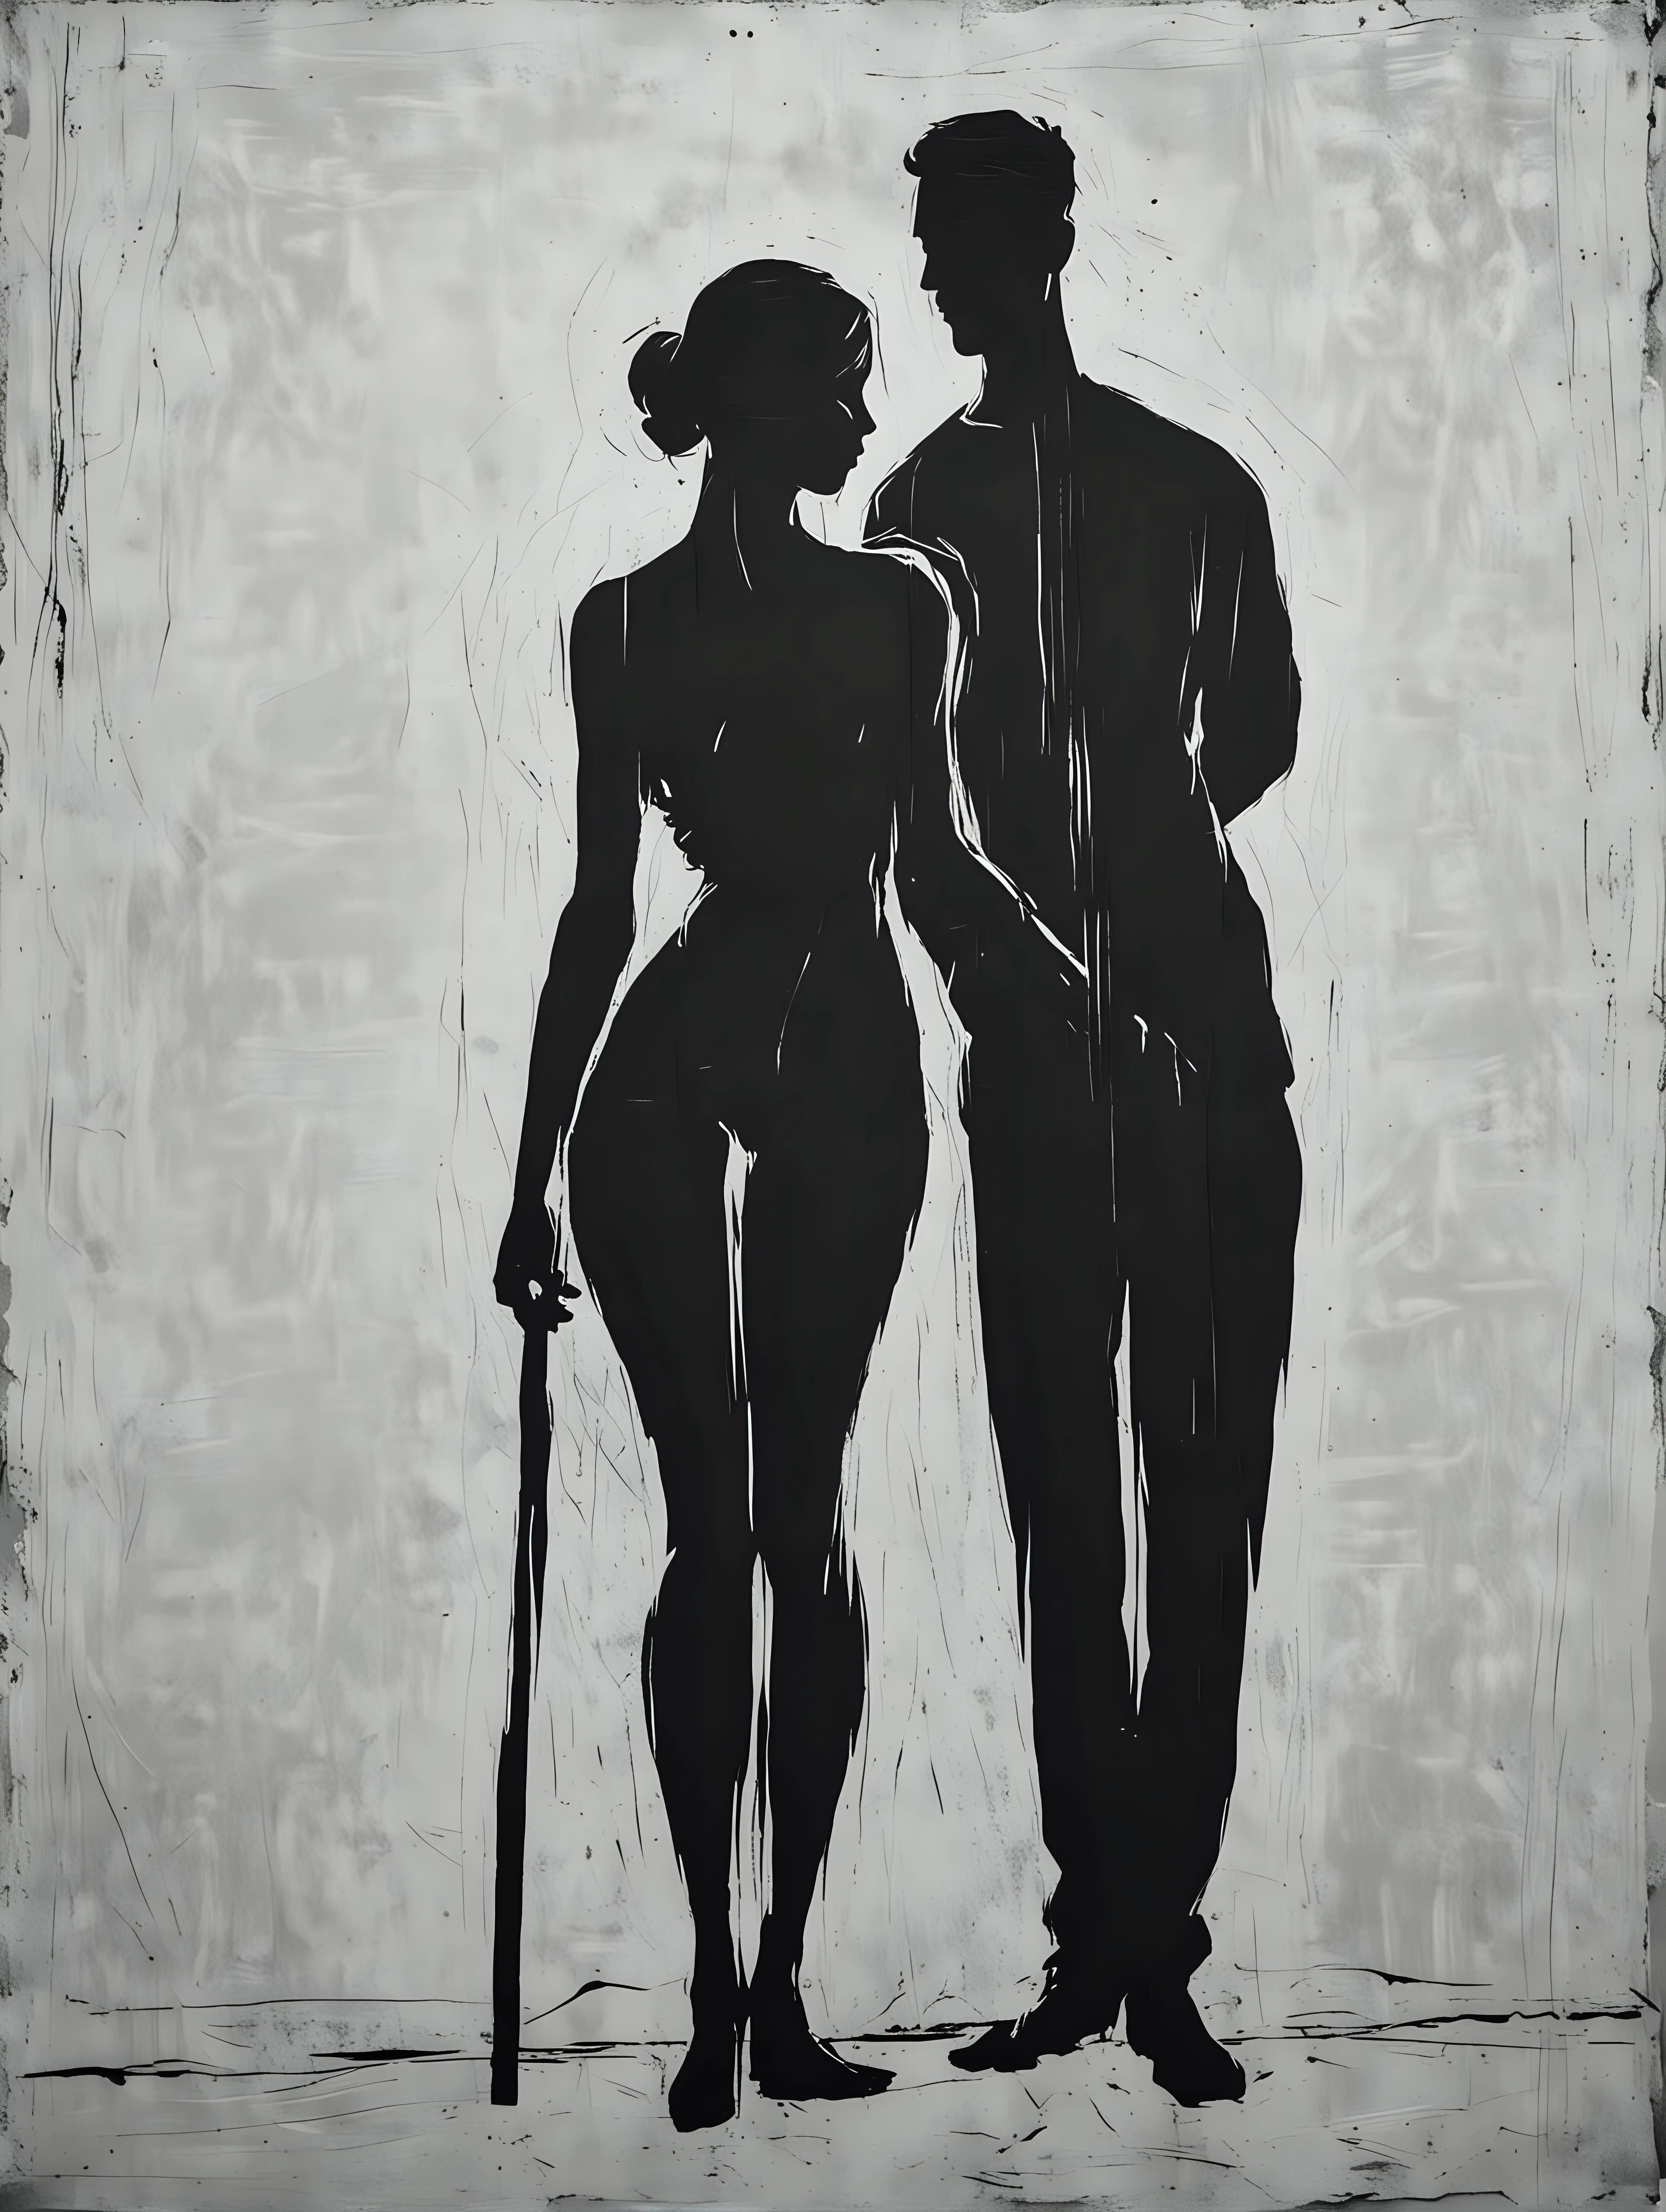 Minimalistic Black and White Silhouette of a Couple in Matisse Style